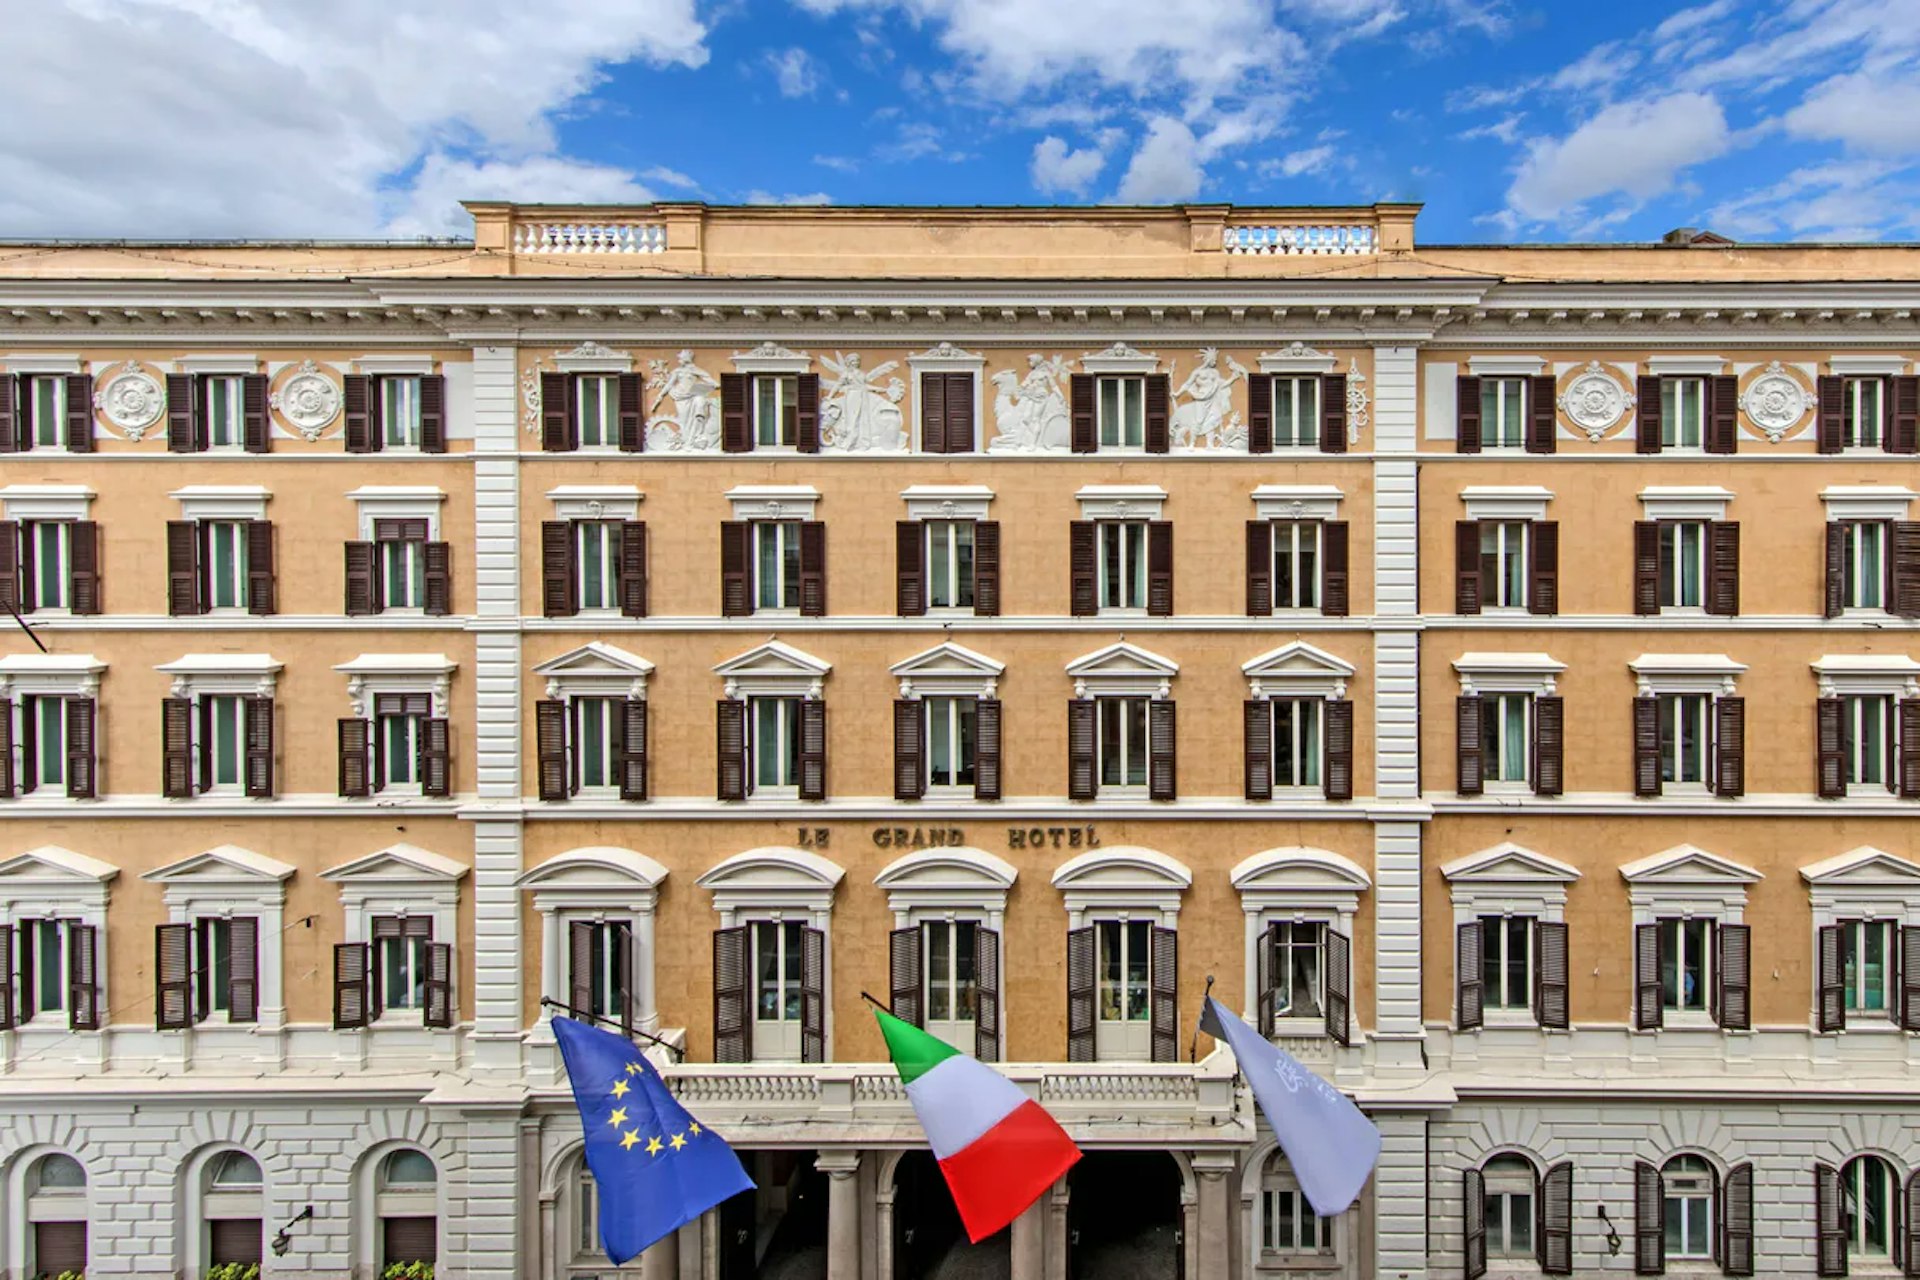 The facade of The St. Regis Rome